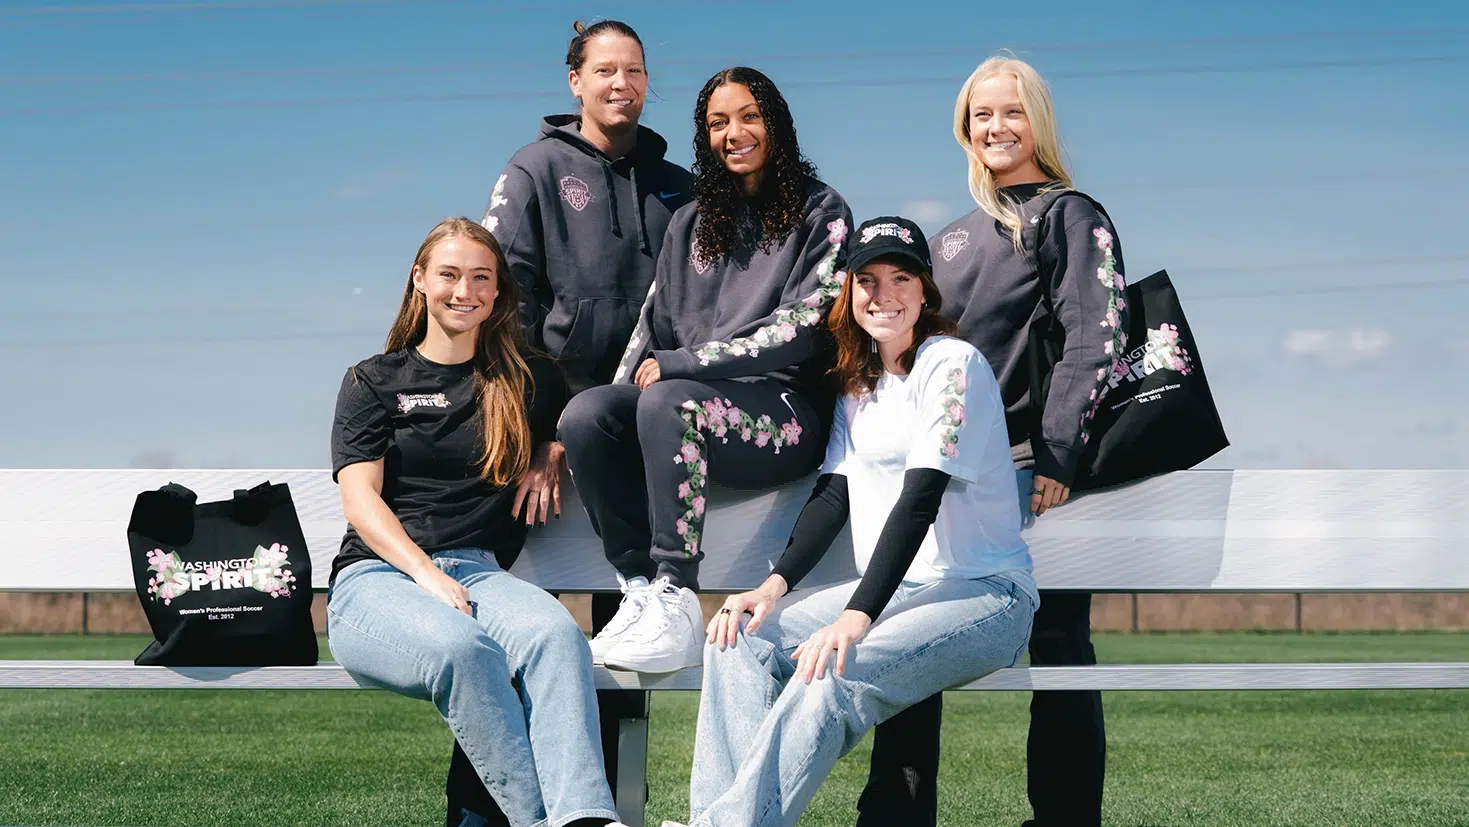 Spirit players wearing various pieces from the Cherry Blossom capsule including sweatpants, sweatshirts, short sleeve t-shirts, and tote bags.